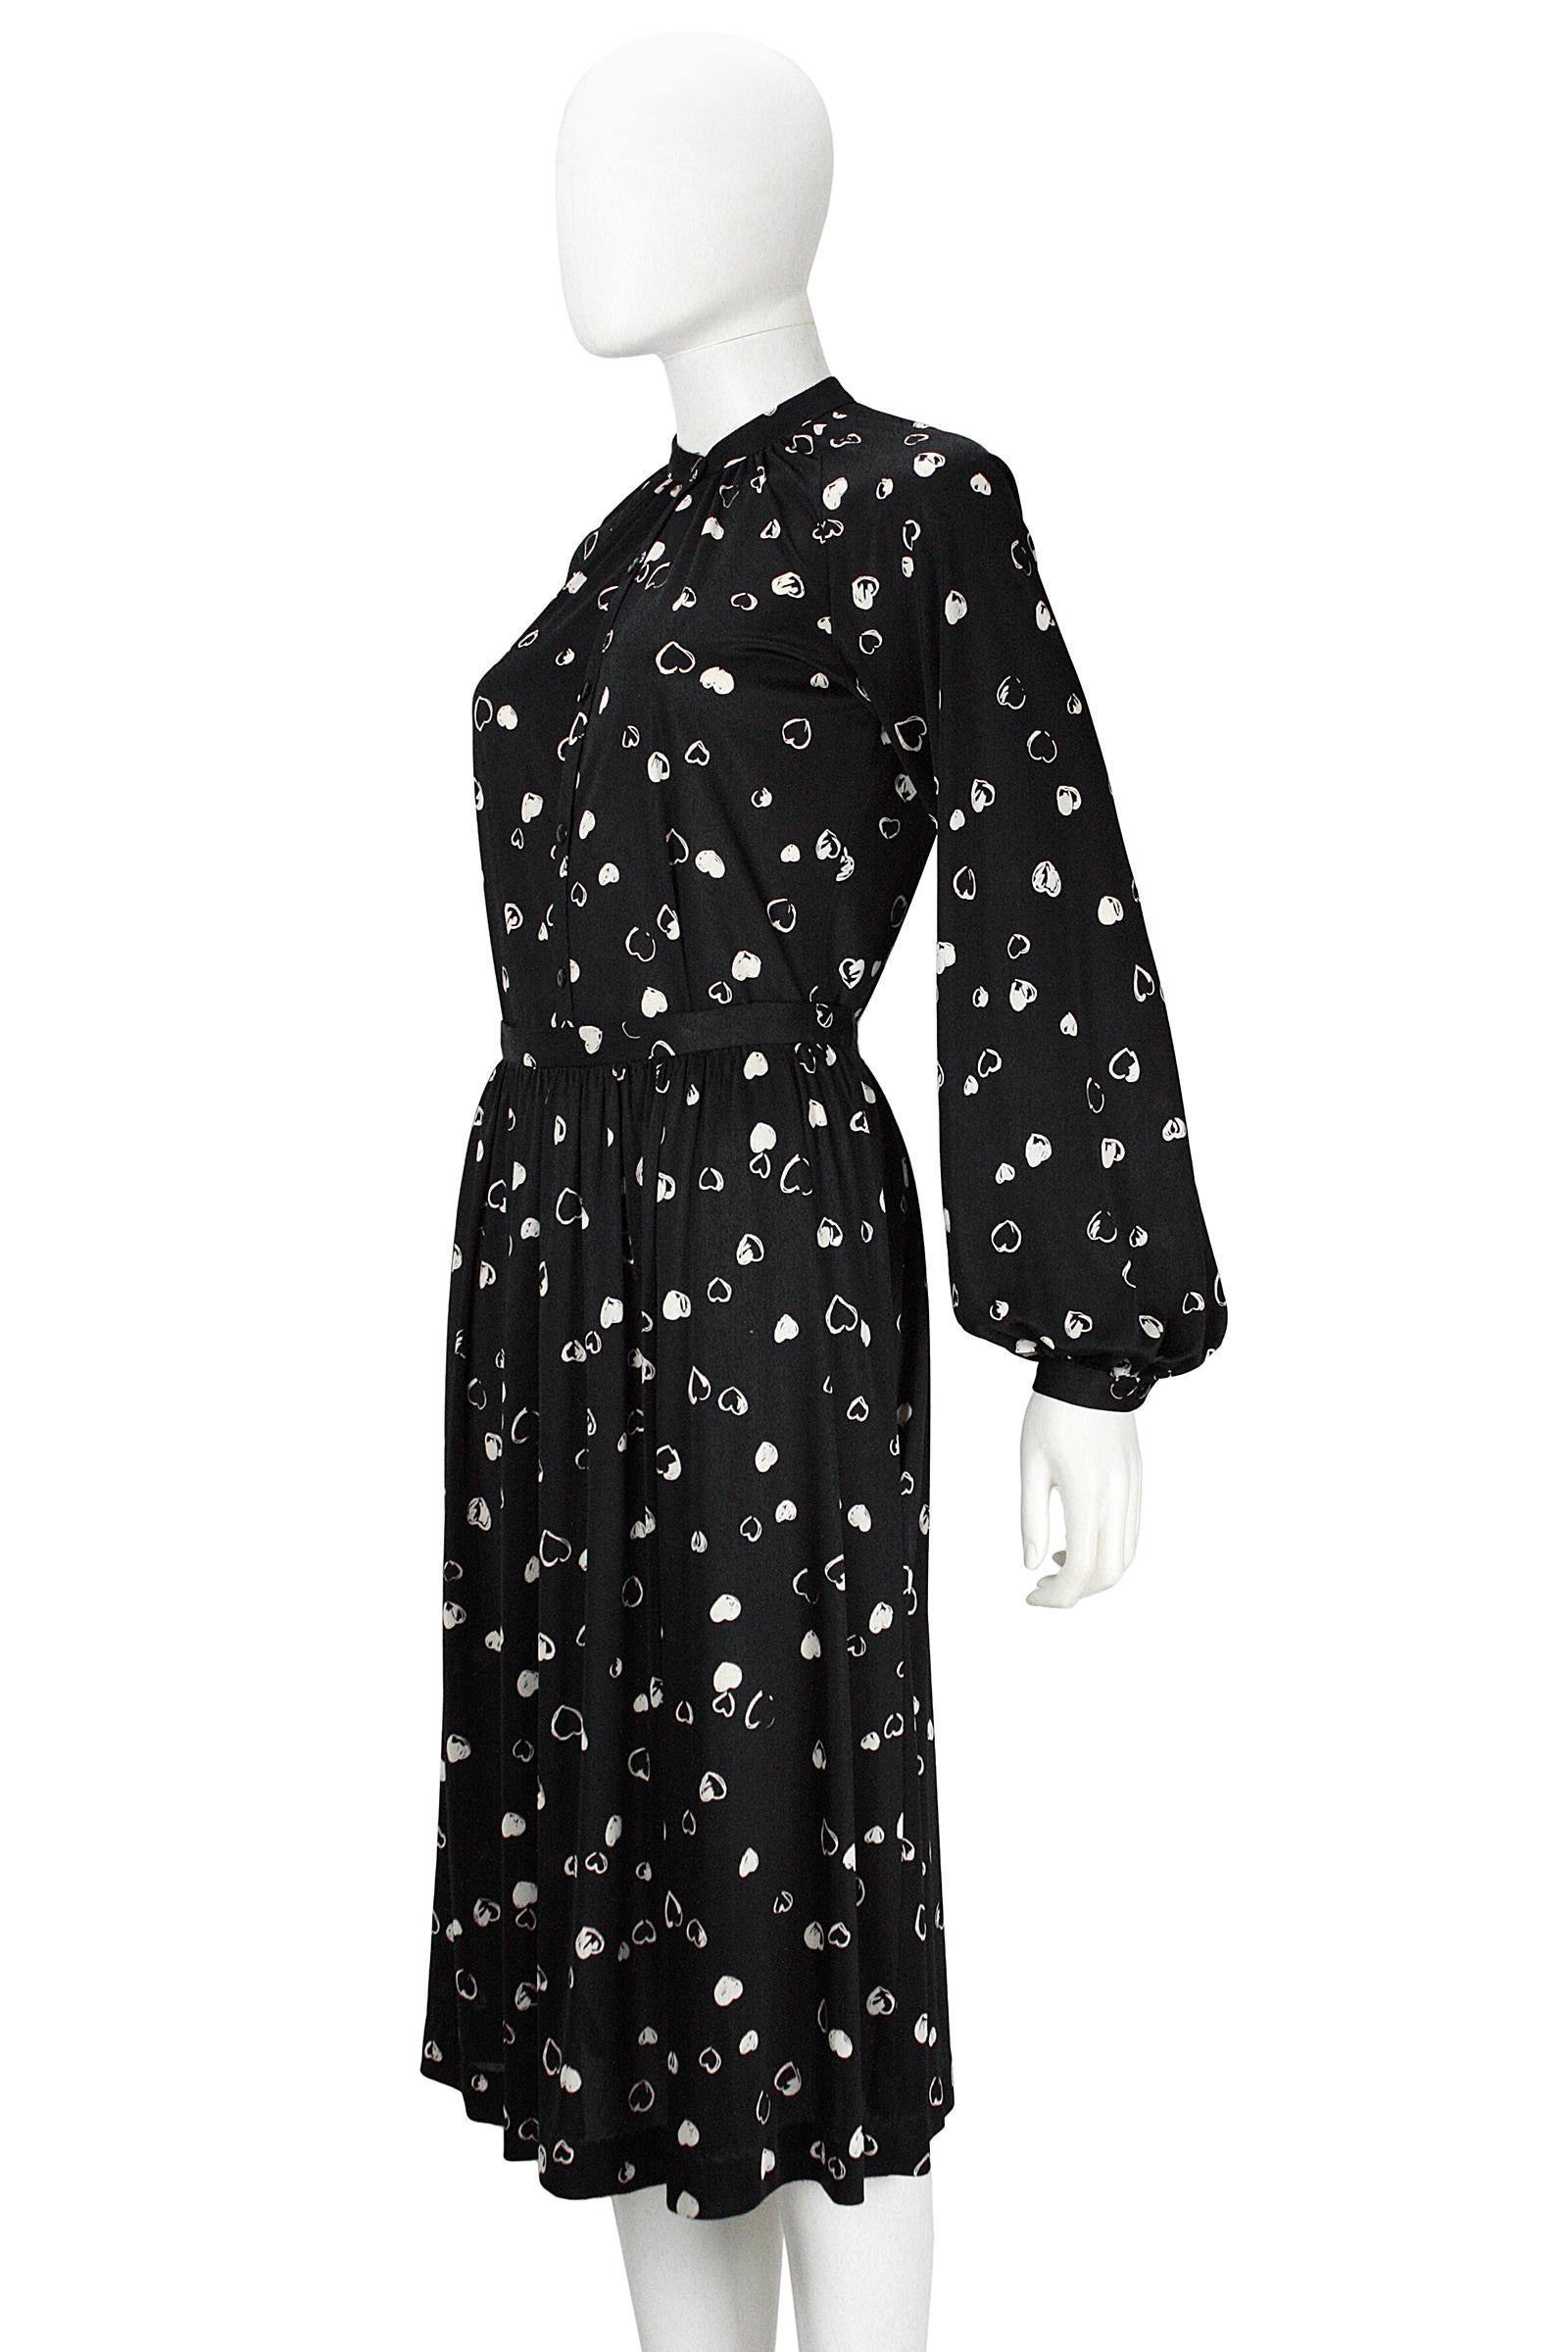 1970s Halston Black and White Heart Print Button-Down Shirt and Skirt In Good Condition For Sale In Los Angeles, CA